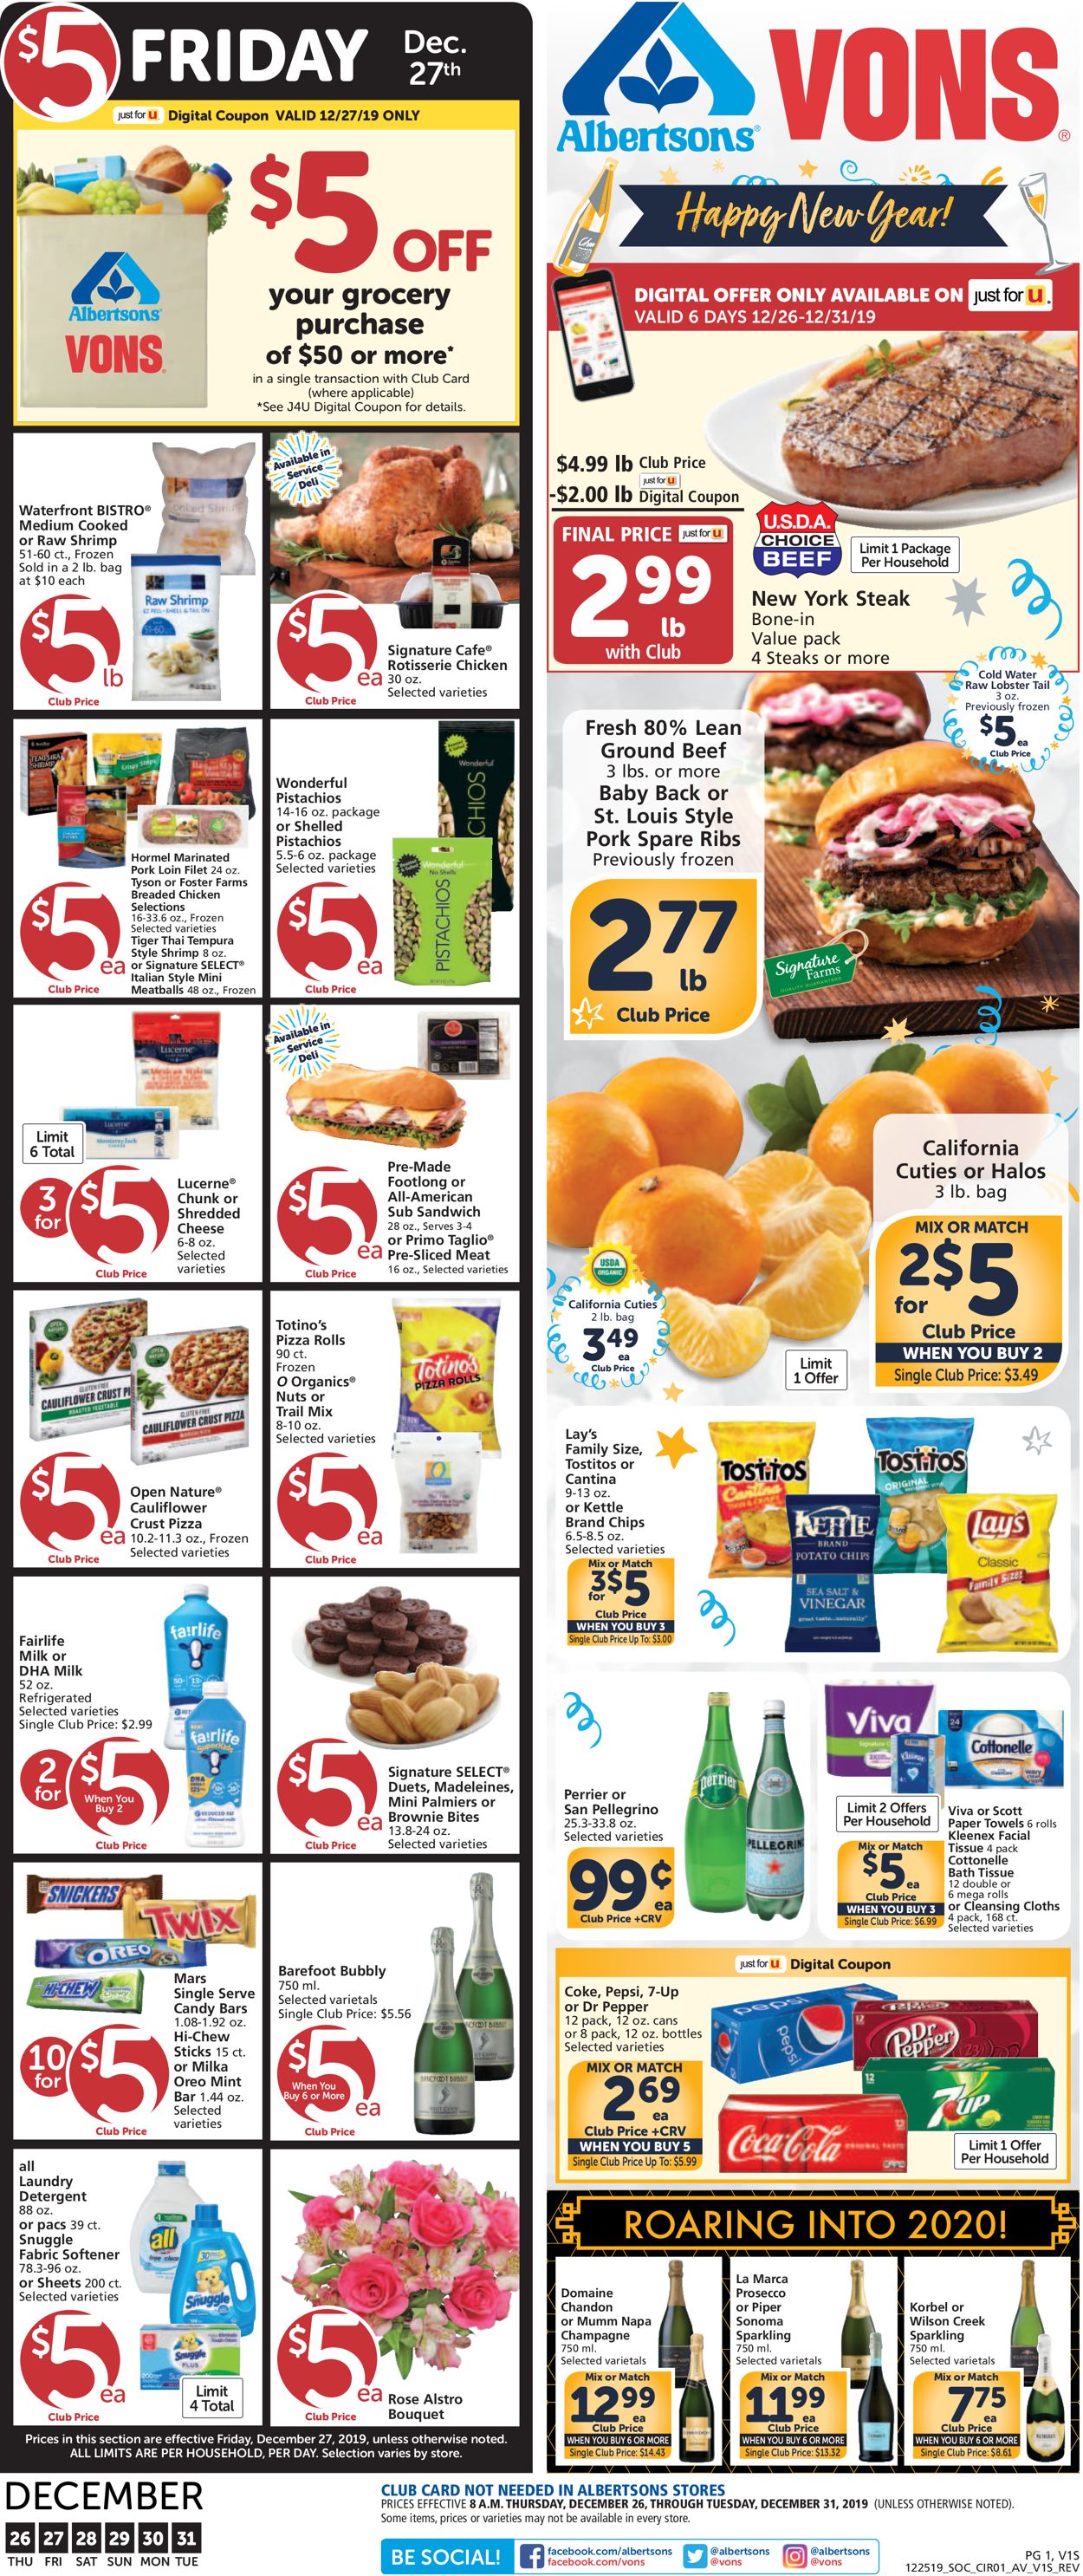 Vons - New Years's Ad 2019/2020 Weekly Ad Circular - valid 12/28-12/31/2019 (Page 3)